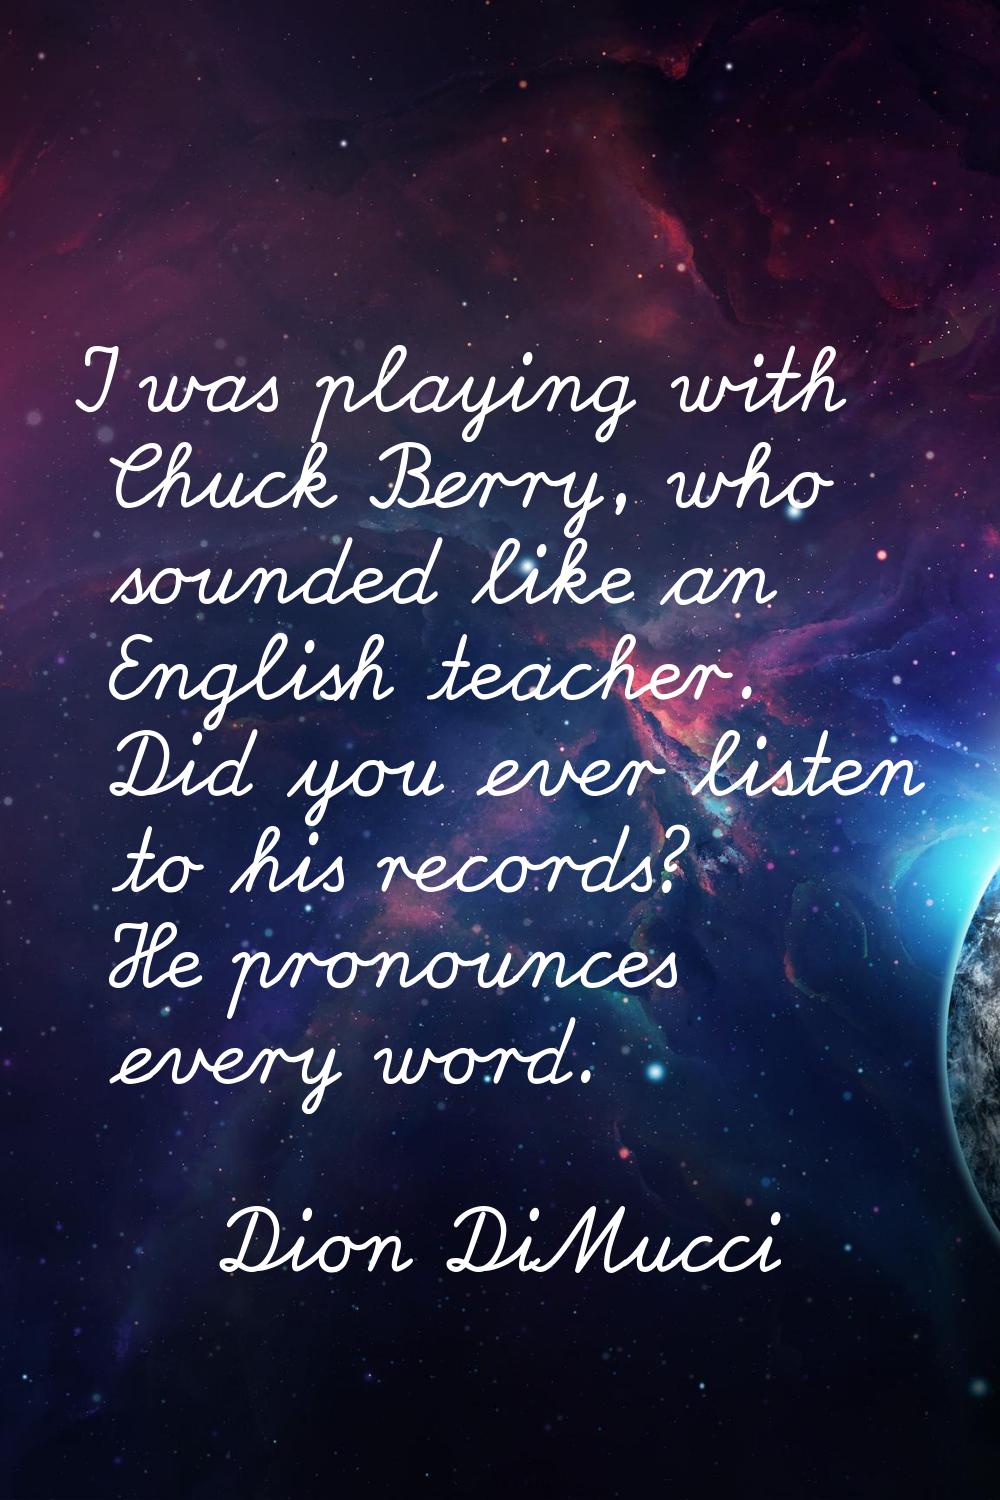 I was playing with Chuck Berry, who sounded like an English teacher. Did you ever listen to his rec